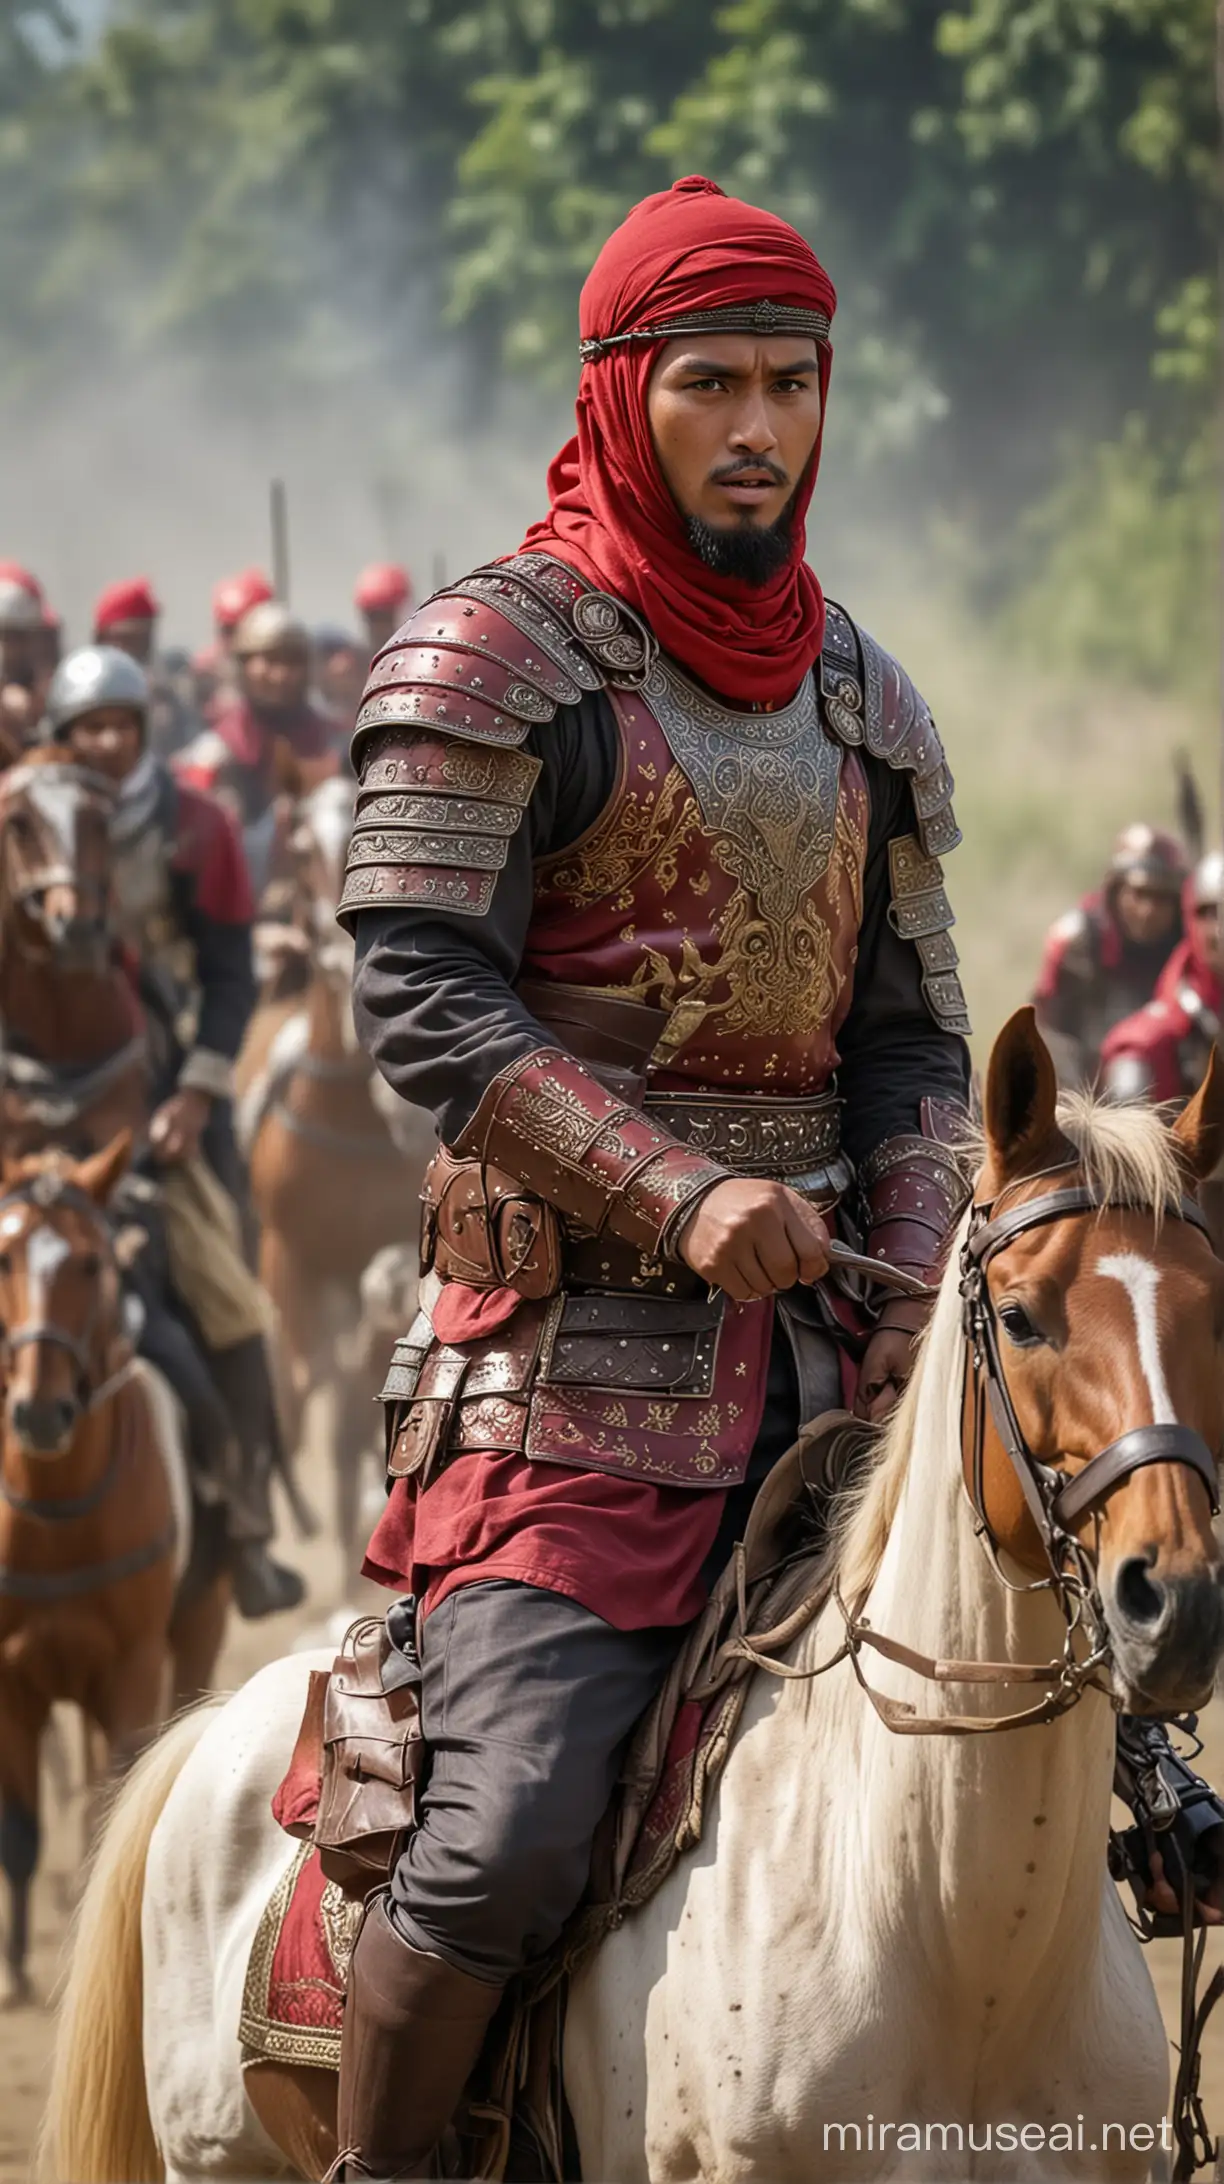 Indonesian Muslim Warrior Riding into Battle in Red Armor